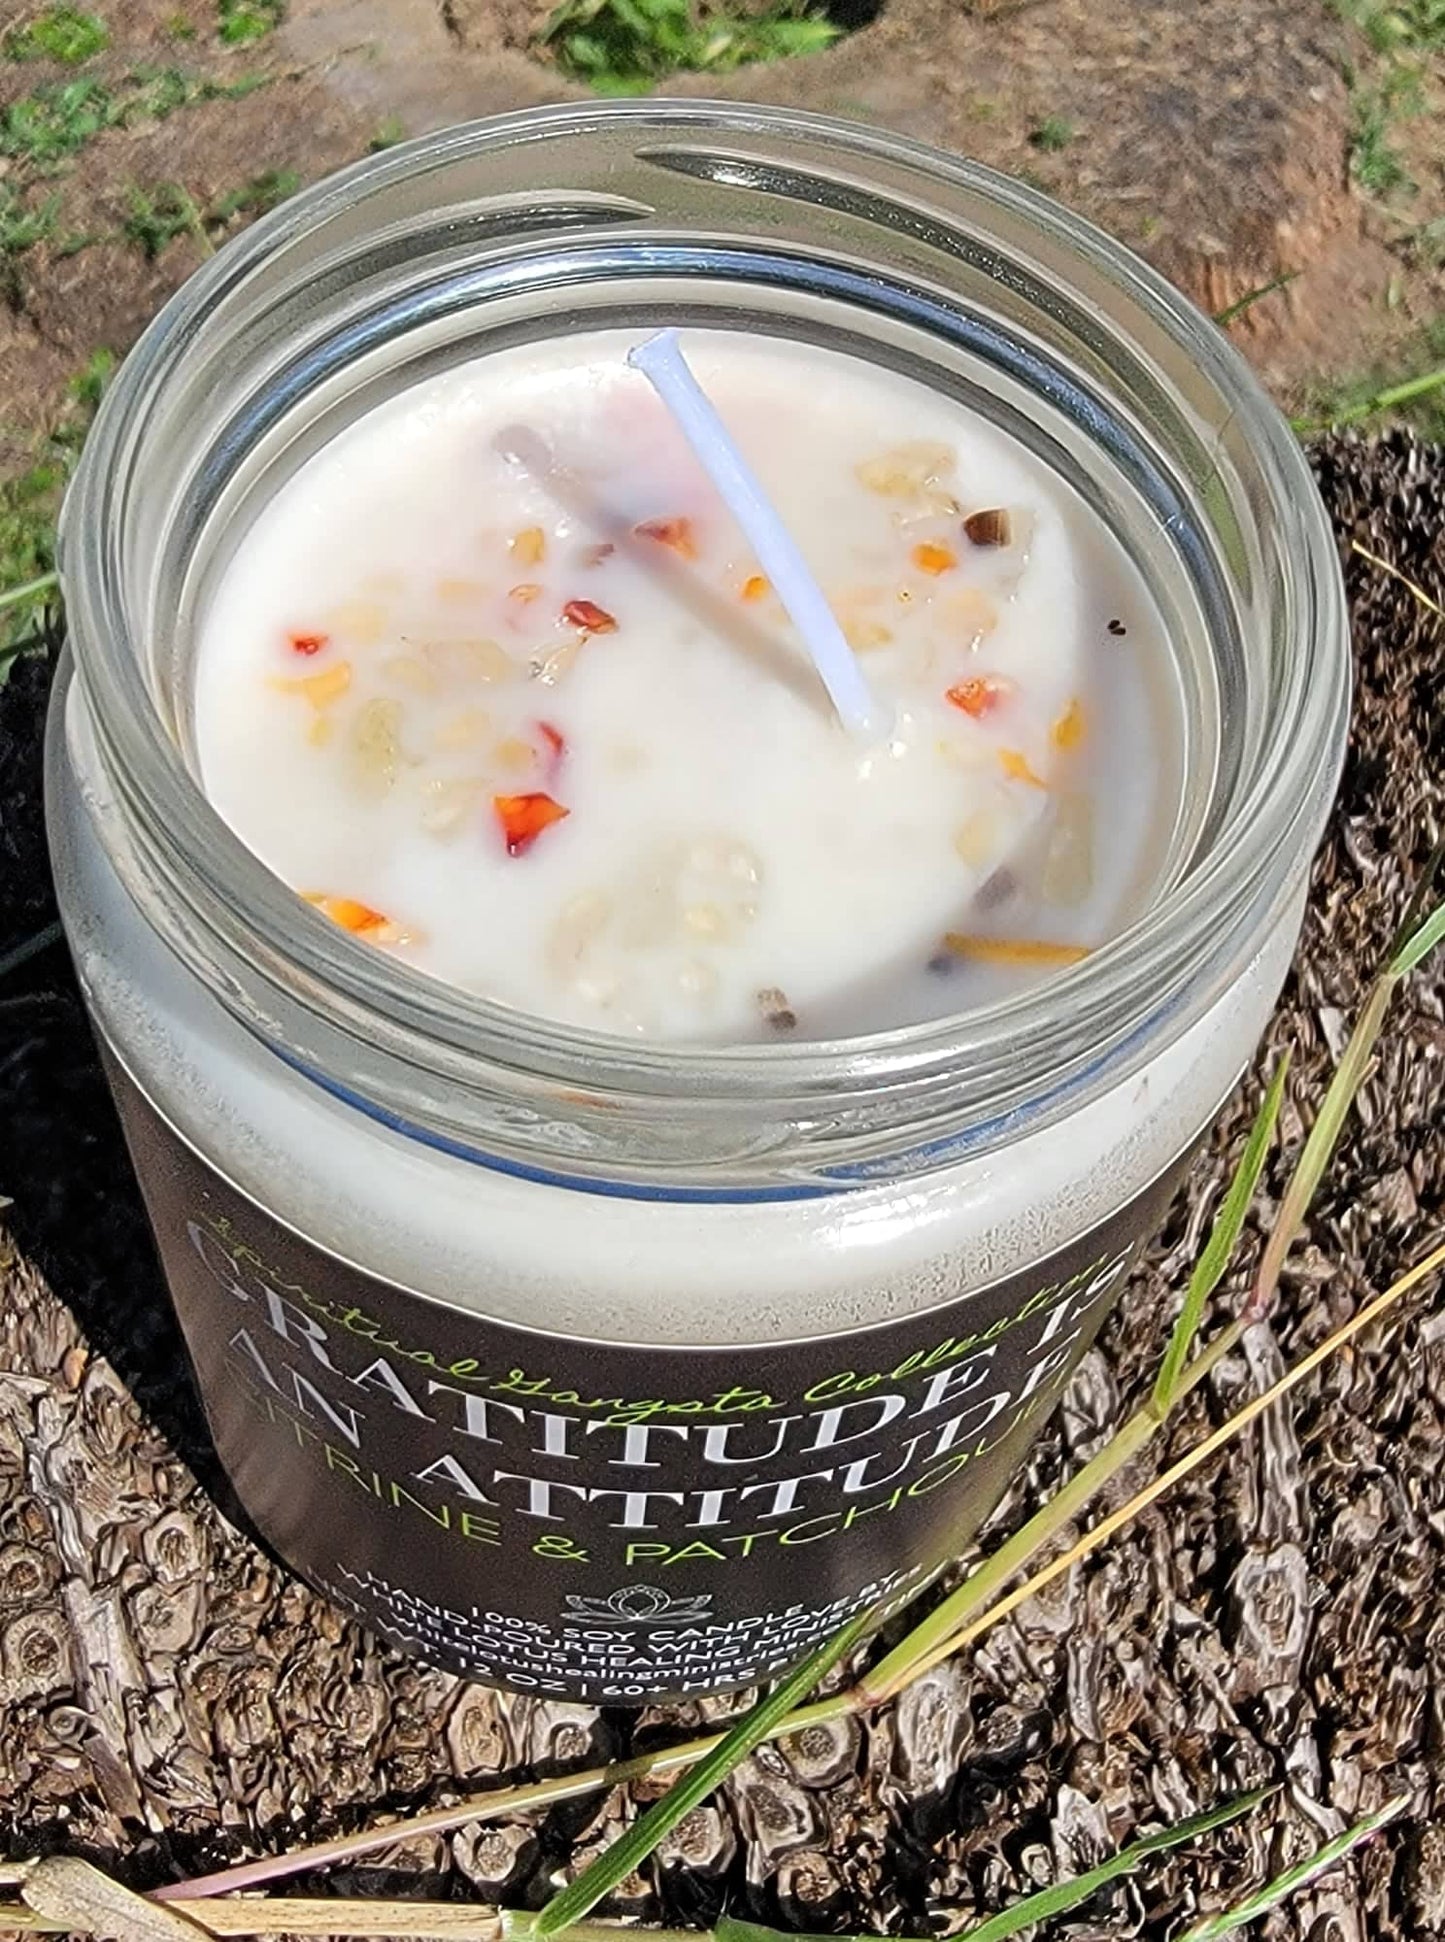 Spiritual Gangsta Collection Candles (12oz) [several styles to choose from]